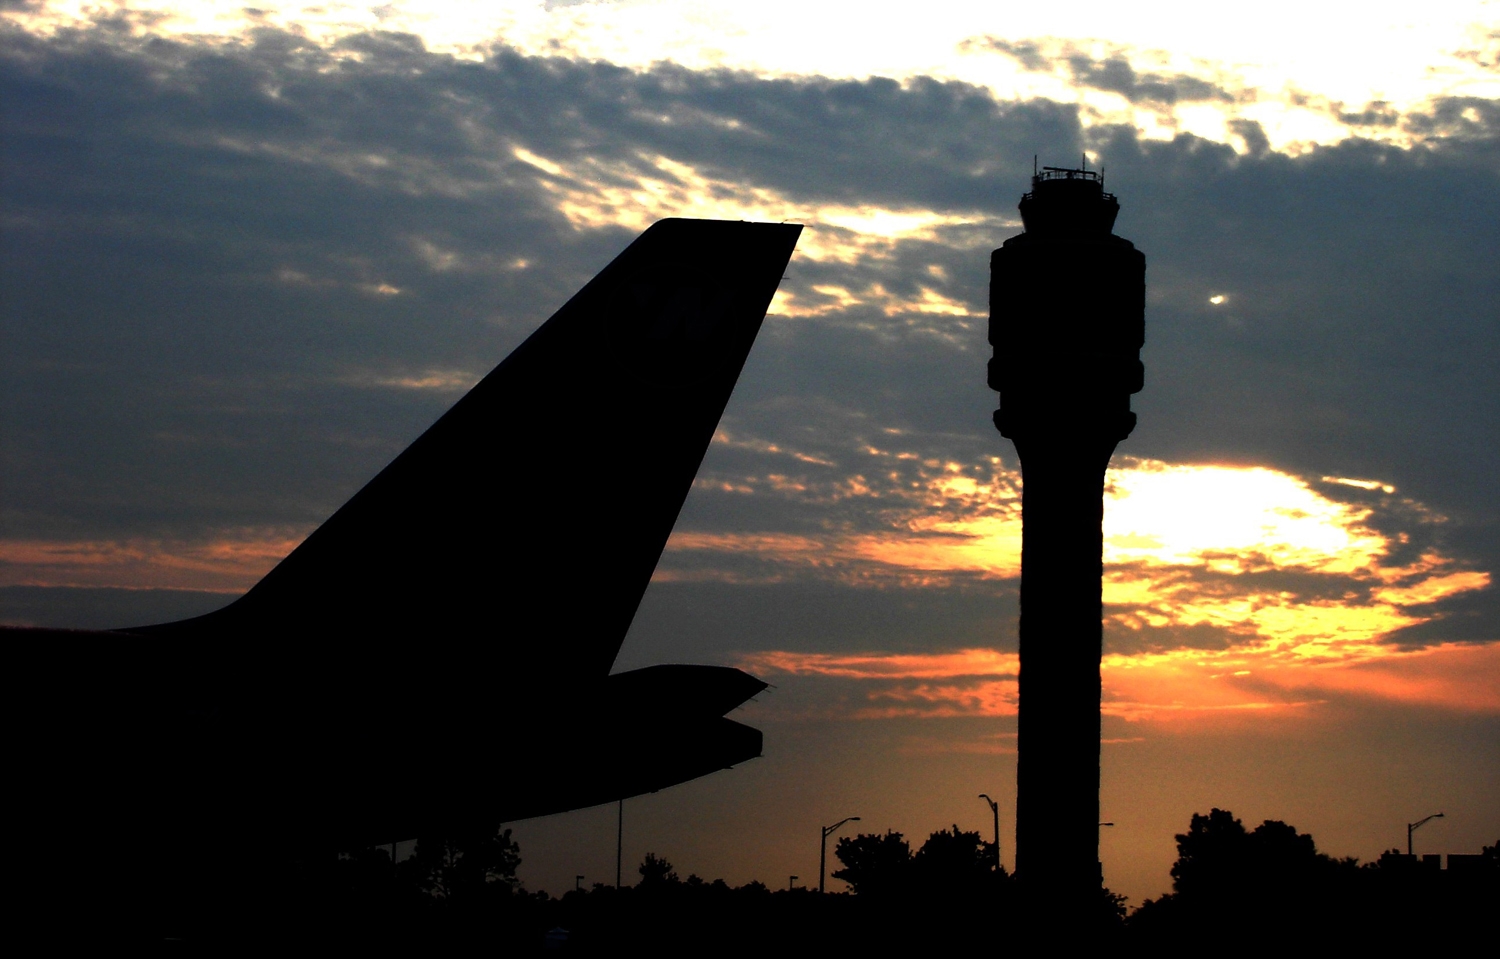 FAA Tower & Tail at Sunrise